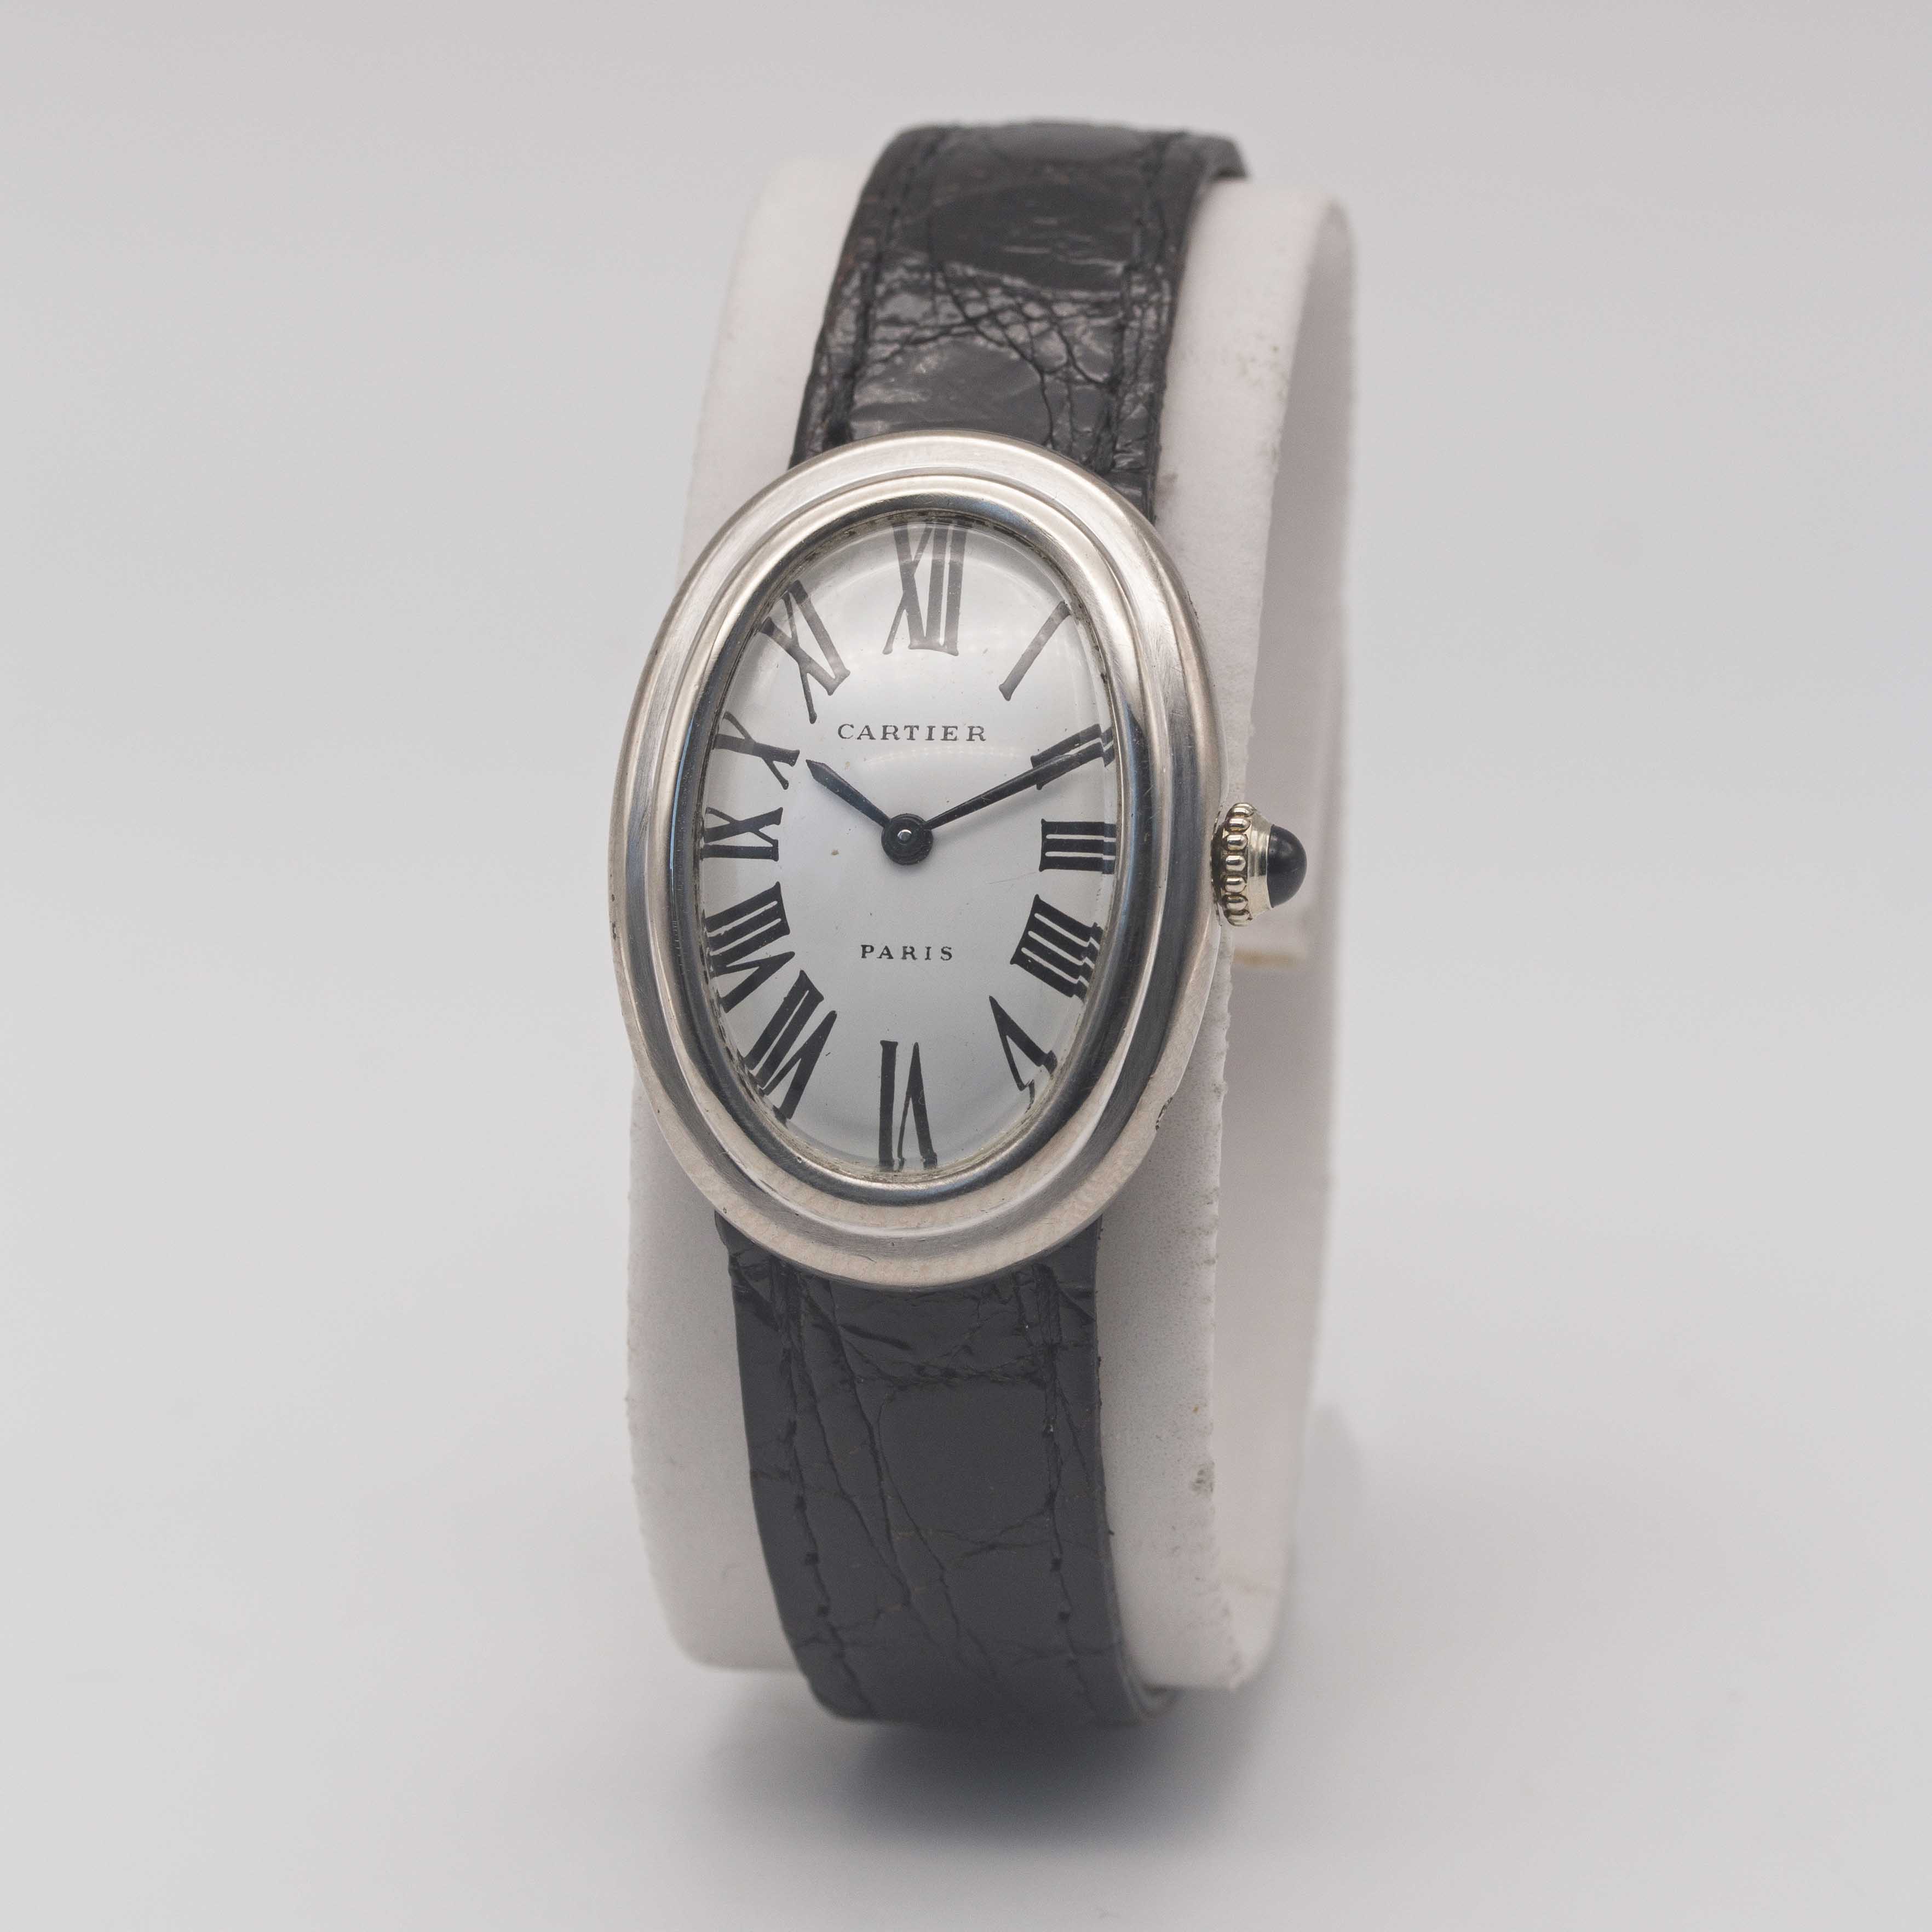 AN 18K SOLID WHITE GOLD CARTIER BAIGNOIRE WRIST WATCH CIRCA 1980s Movement: 17J, manual wind, signed - Image 4 of 14